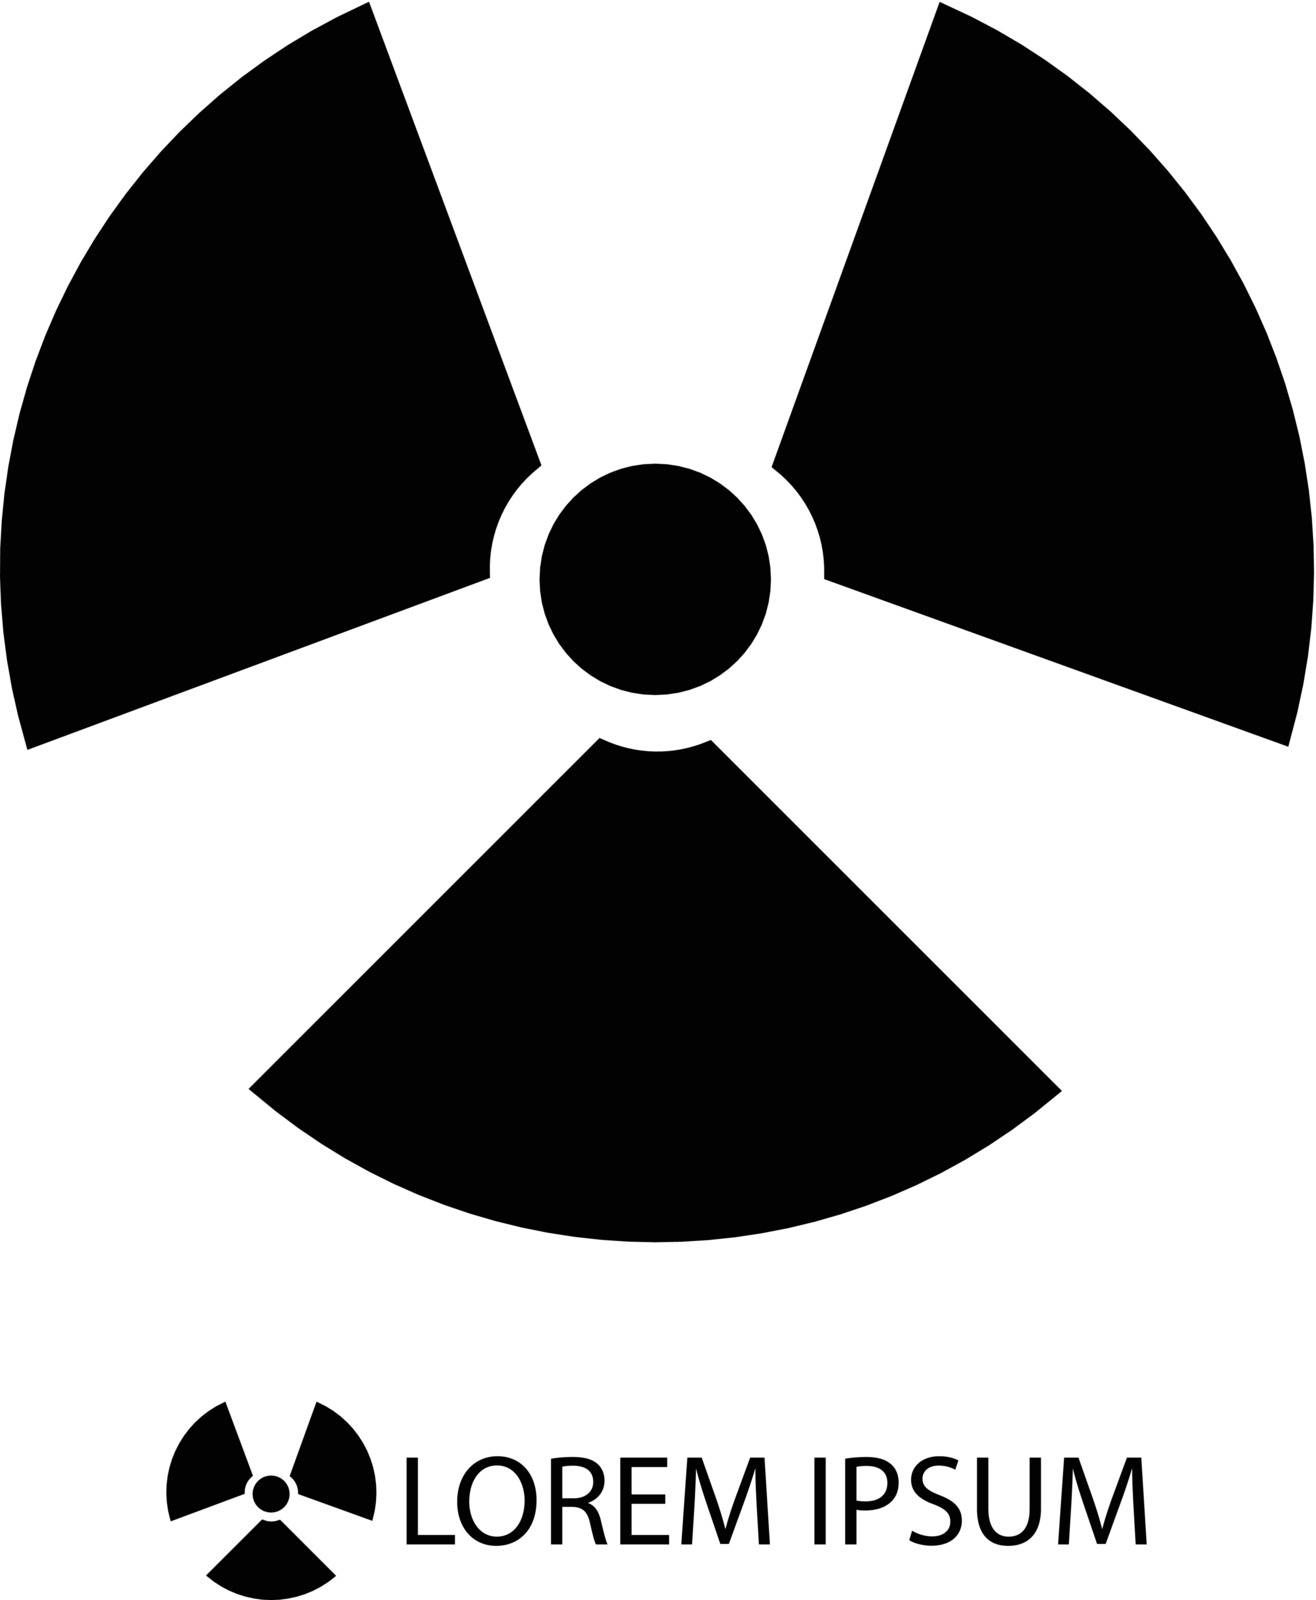 Black radiation sign as logo on white background with copyspace